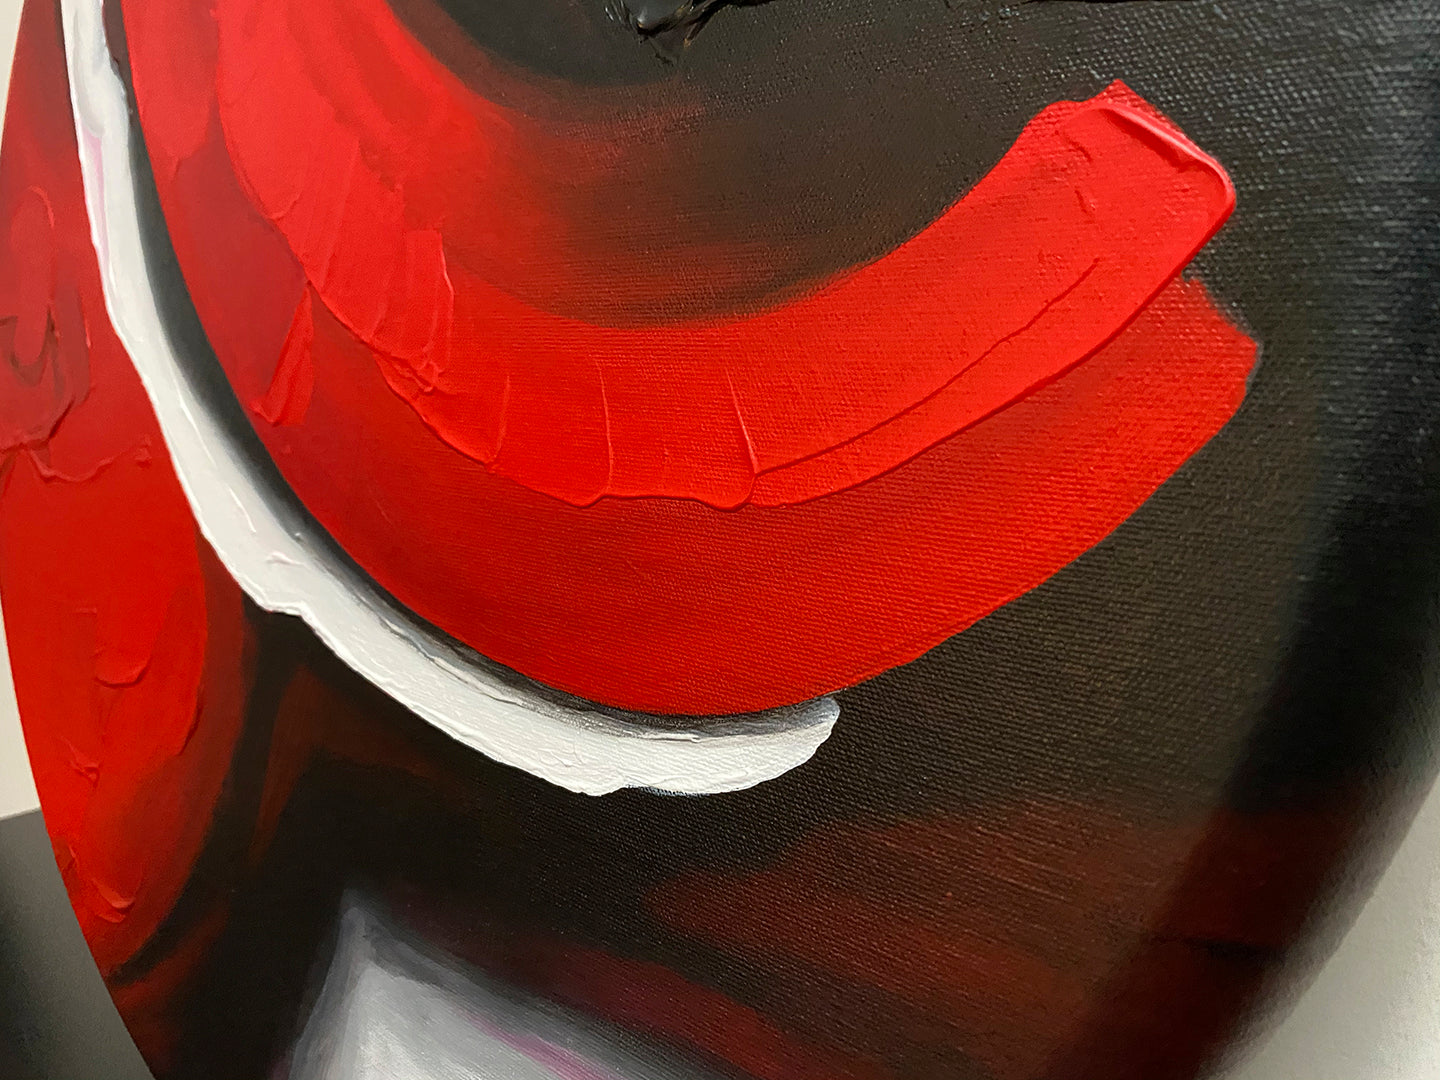 Abstract, acrylic and mixed-media painting close-up of the texture paste, red, black, grey, and white acrylic paint on round canvas focusing on the beautiful curved-edges 3